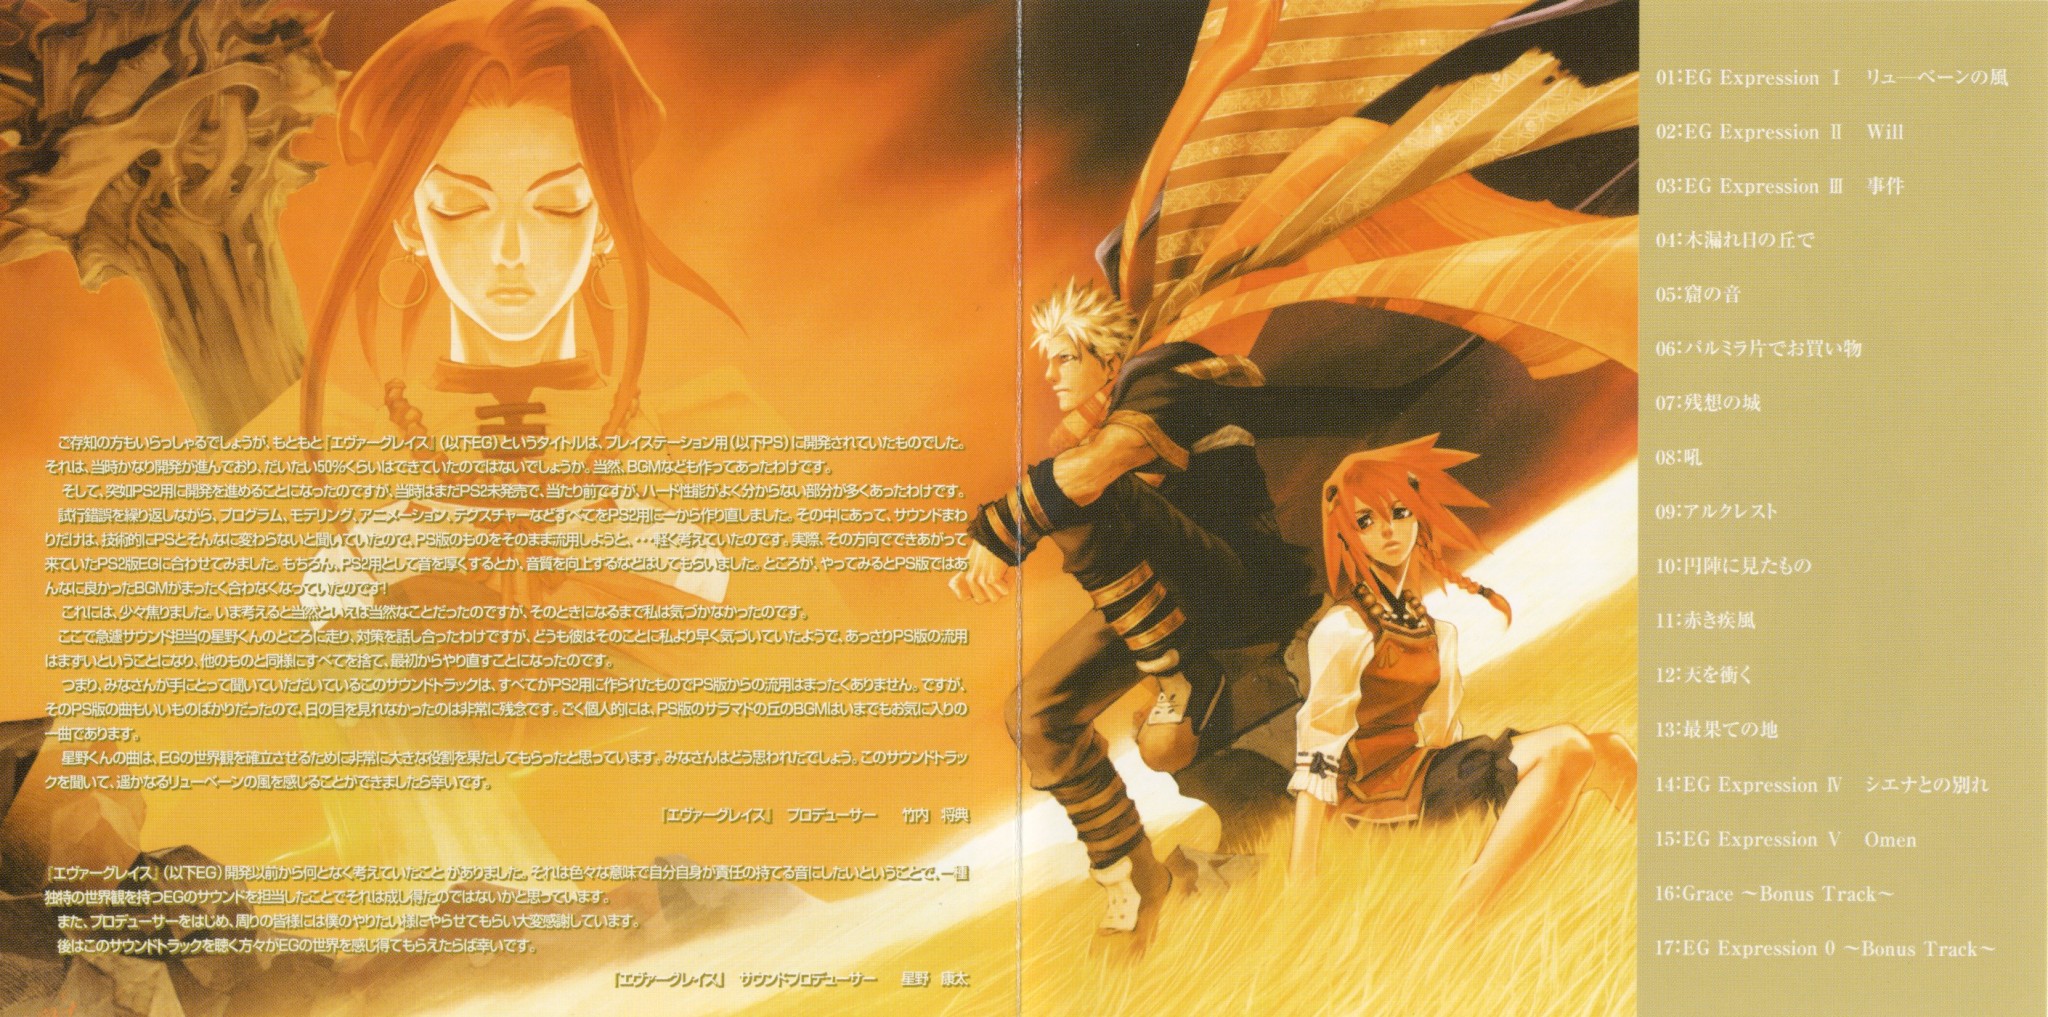 scan of liner notes from evergrace original soundtrack, with darius sitting on a rock scarves fluttering in the wind, and sharline sitting on the grass swept hill beside him, hair also fluttering. in the bg is the tower and a bust shot of sienna, eyes closed, translucent in the sky. there is japanese text superimposed on the bottom left, and list of tracks in evergrace on a right solid beige column. lastly, there is a vertical crease in the middle of the scan.